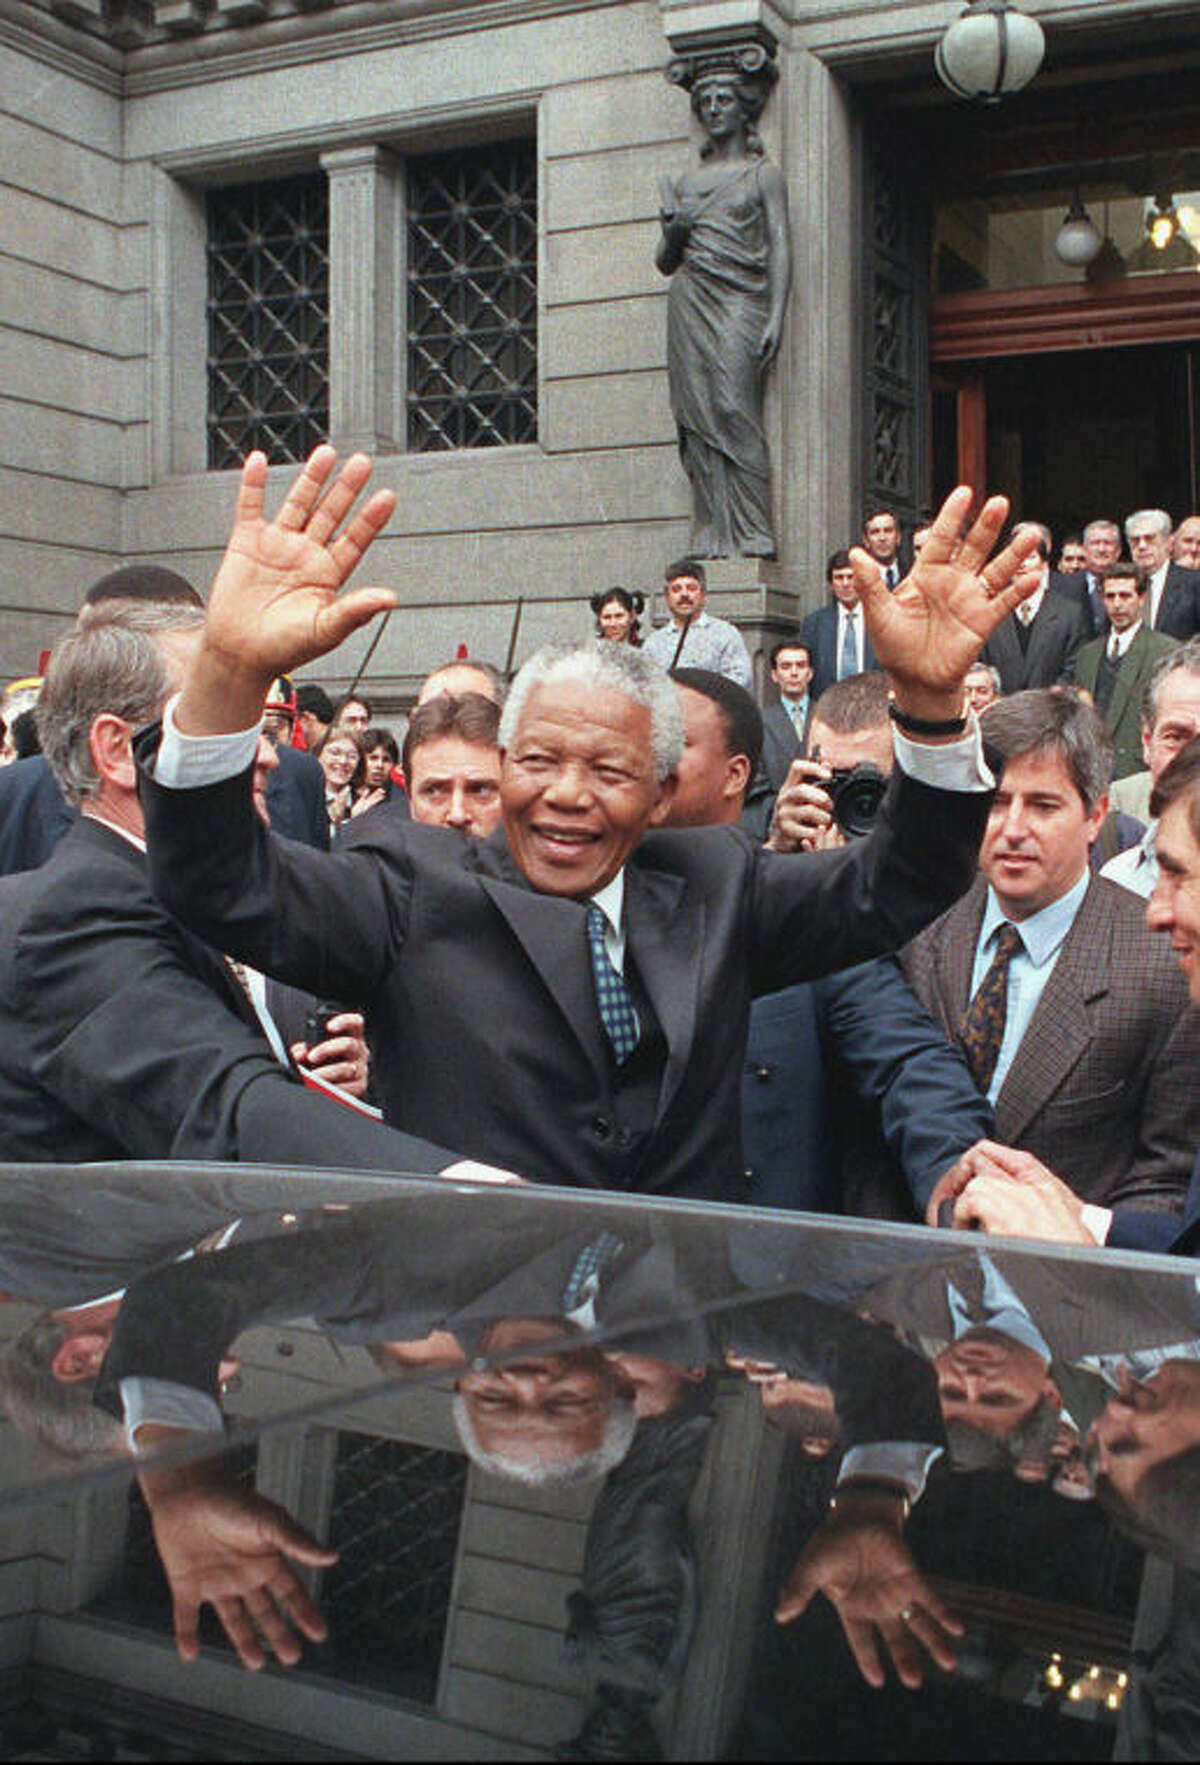 FILE - In this July 23, 1998 file photo, South African President Nelson Mandela greets a crowd outside the National Congress building in Buenos Aires, Argentina, as he arrives for a meeting of the four-nation South American Common Market, or Mercosur. South Africa's president Jacob Zuma says, Thursday, Dec. 5, 2013, that Mandela has died. He was 95. (AP Photo/Daniel Muzio, File)